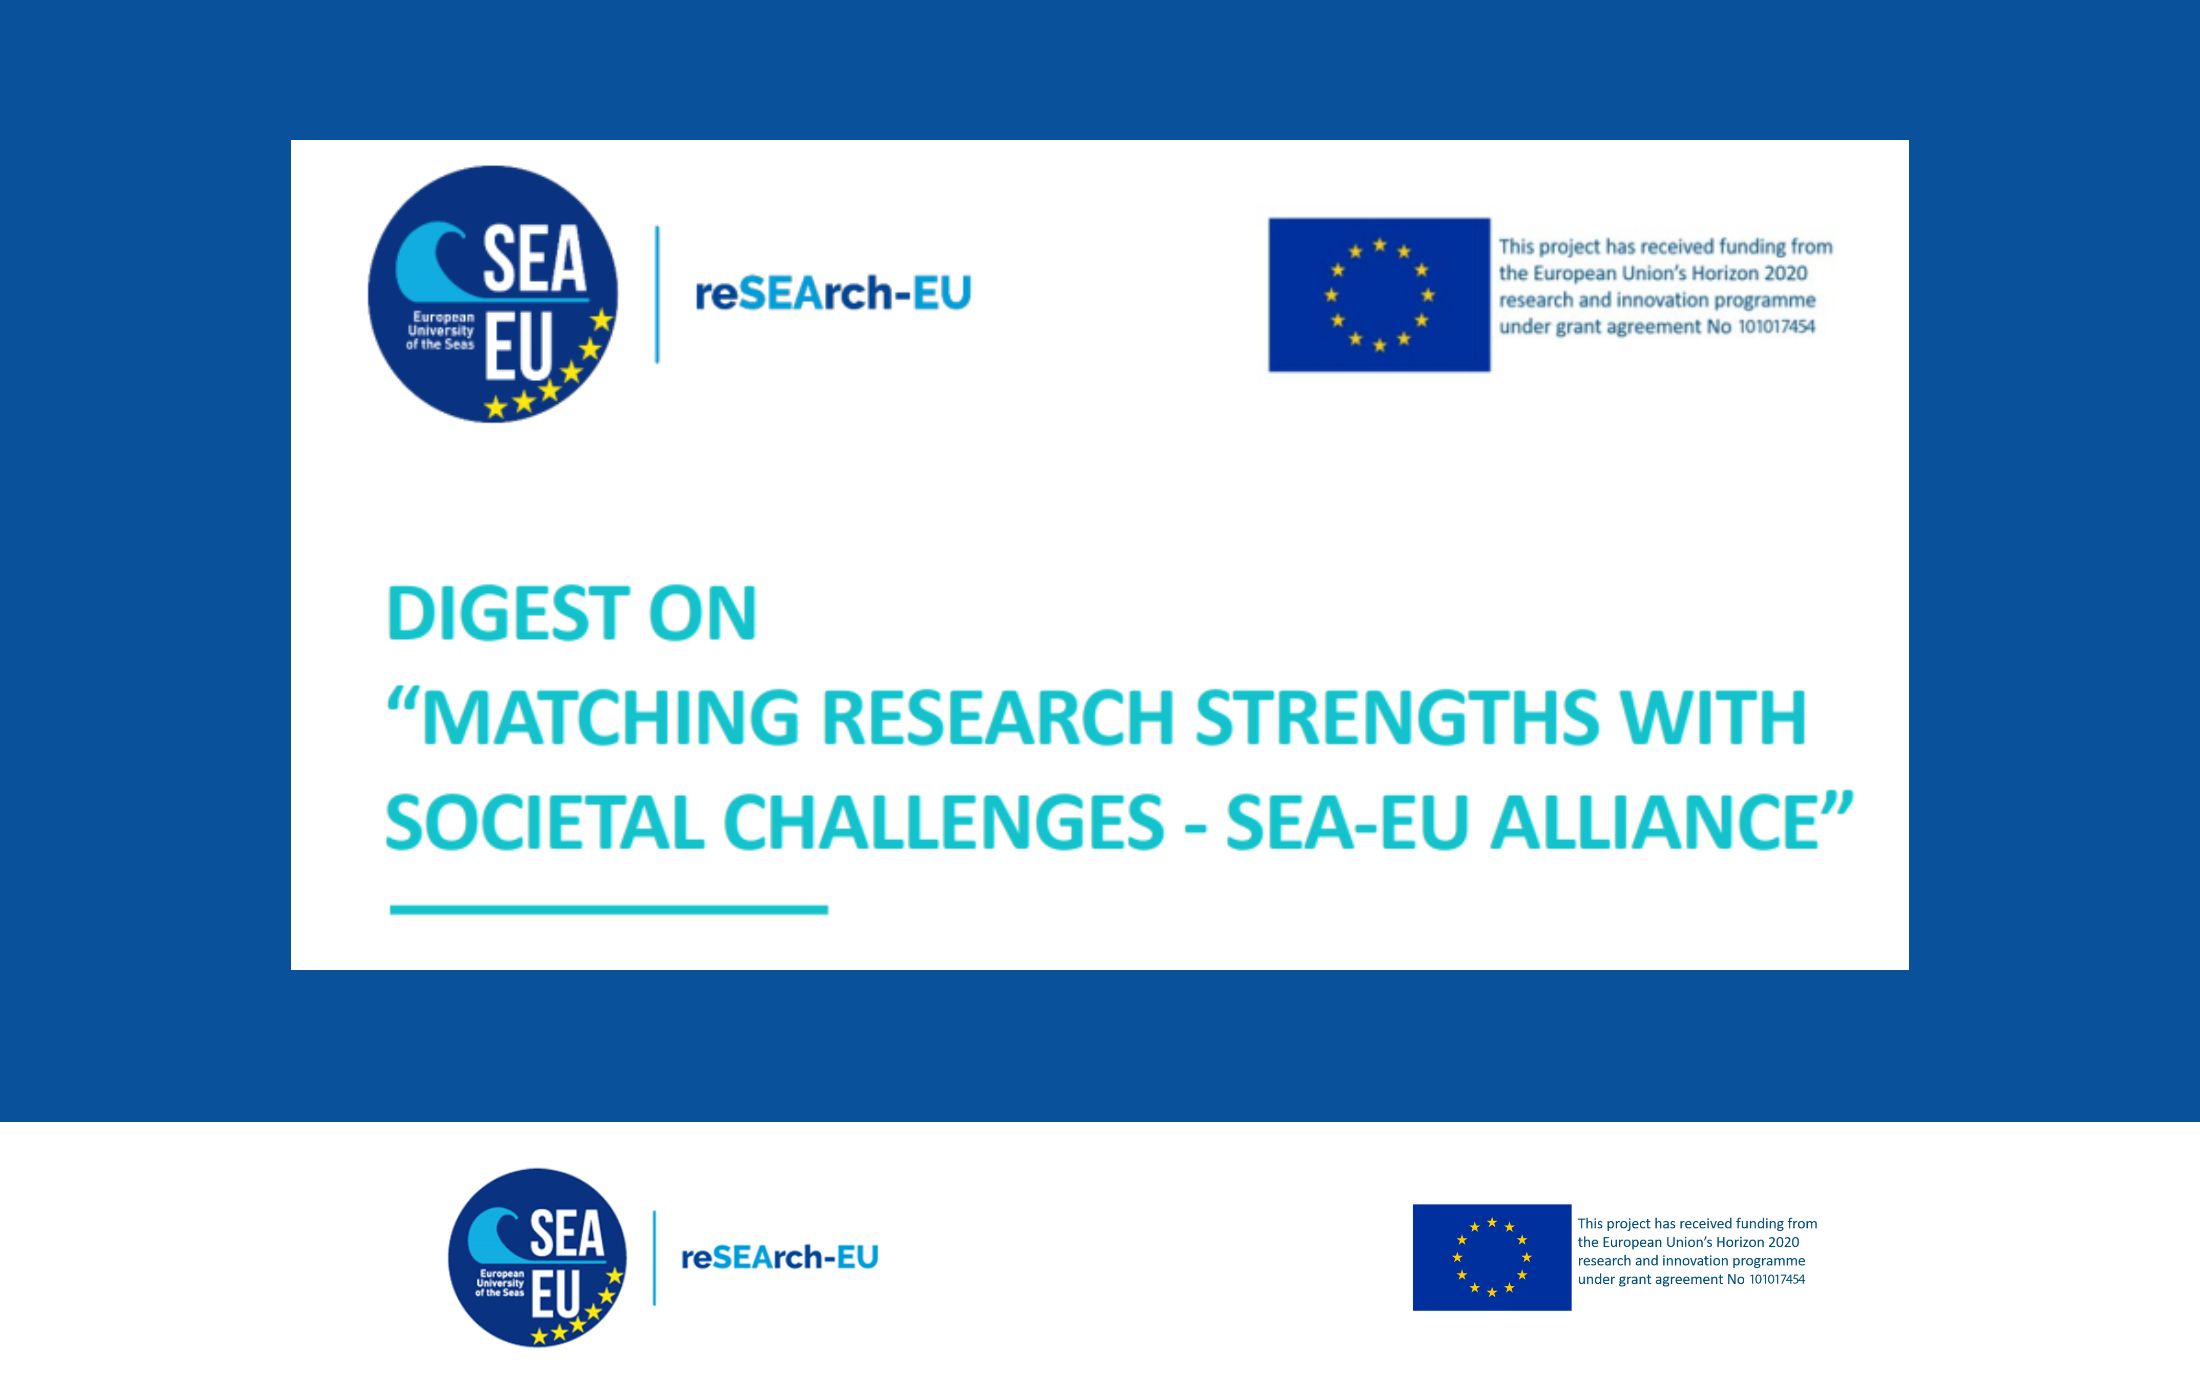 DIGEST ON “MATCHING RESEARCH STRENGTHS WITH SOCIETAL CHALLENGES - SEA-EU ALLIANCE”